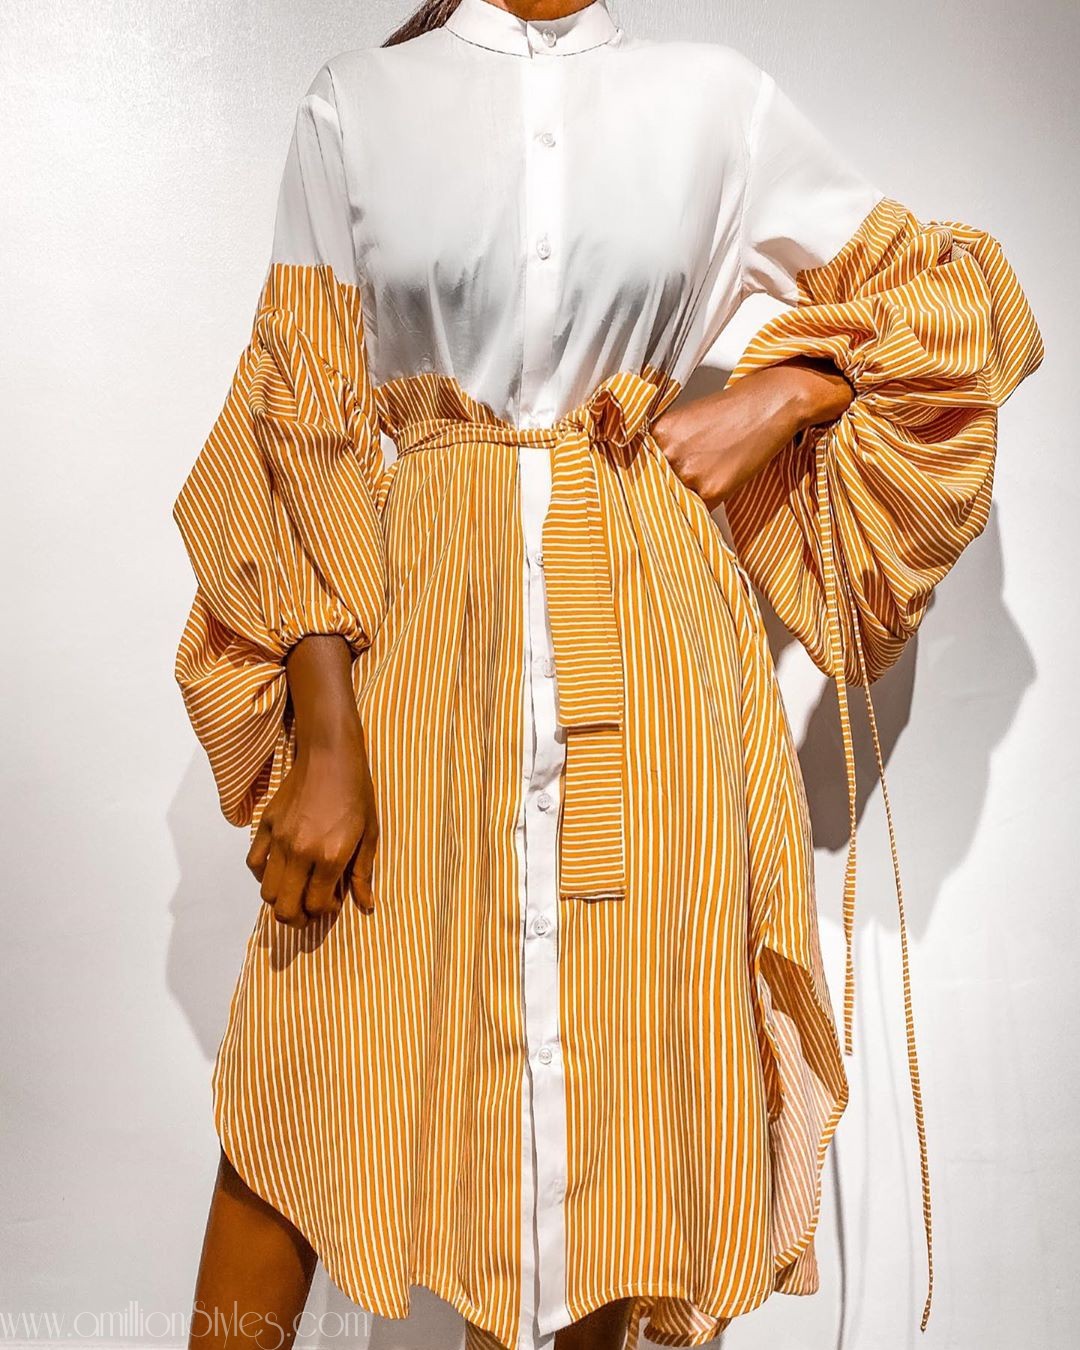 You'll Covet These 10 Pieces By Nigerian Designer Knanfe